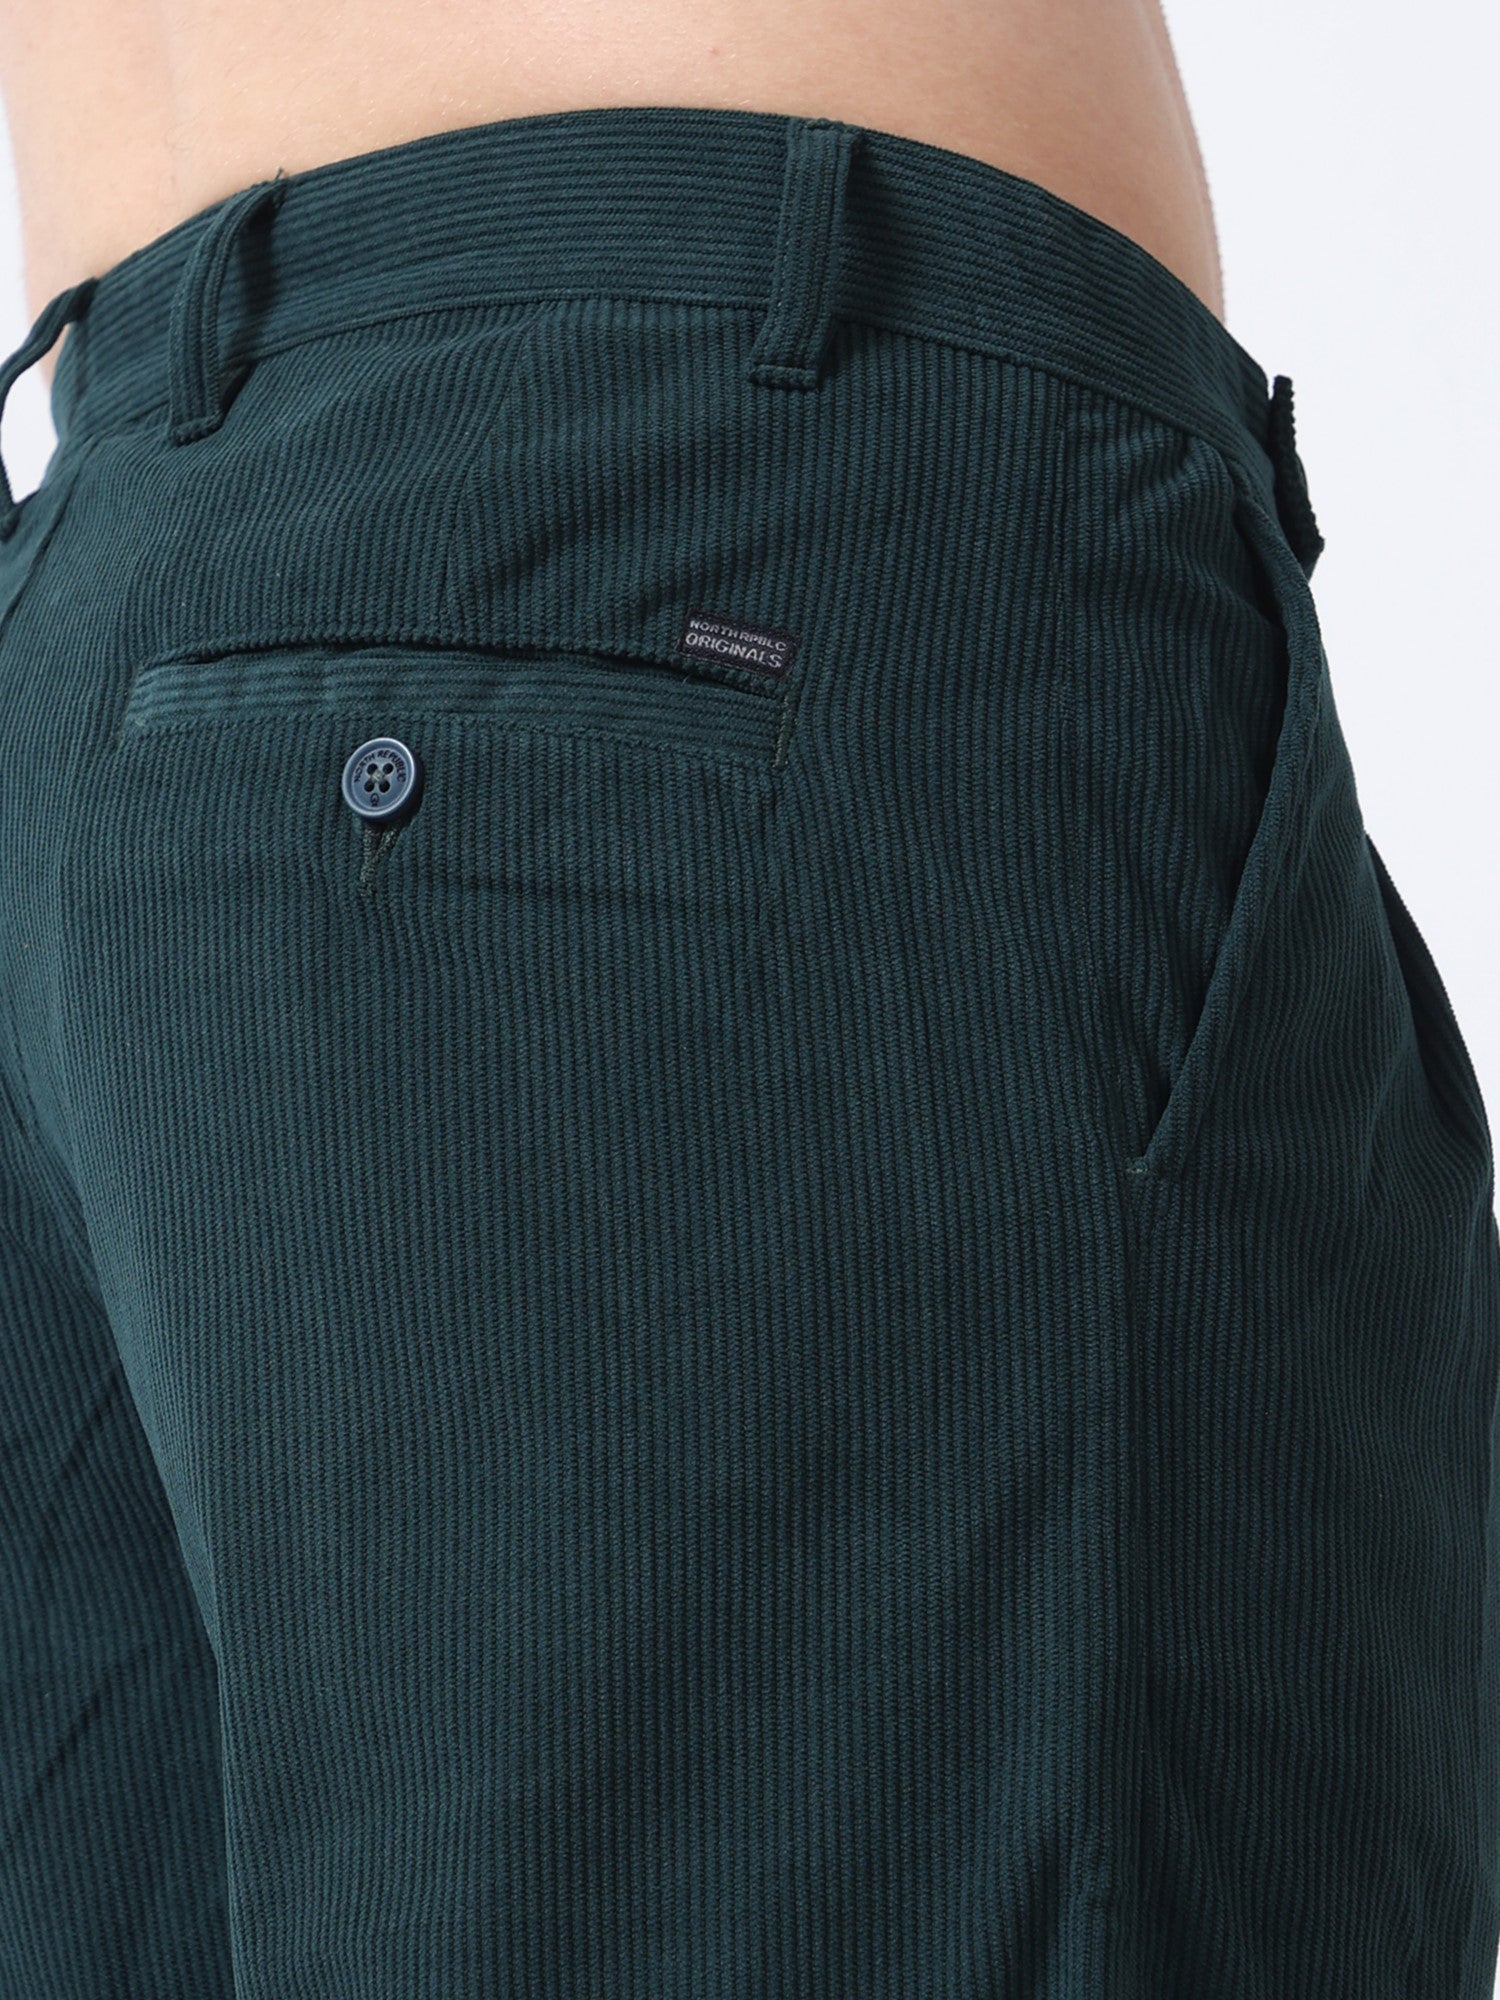 Dark Green Relaxed Fit Men's Baggy Pant 